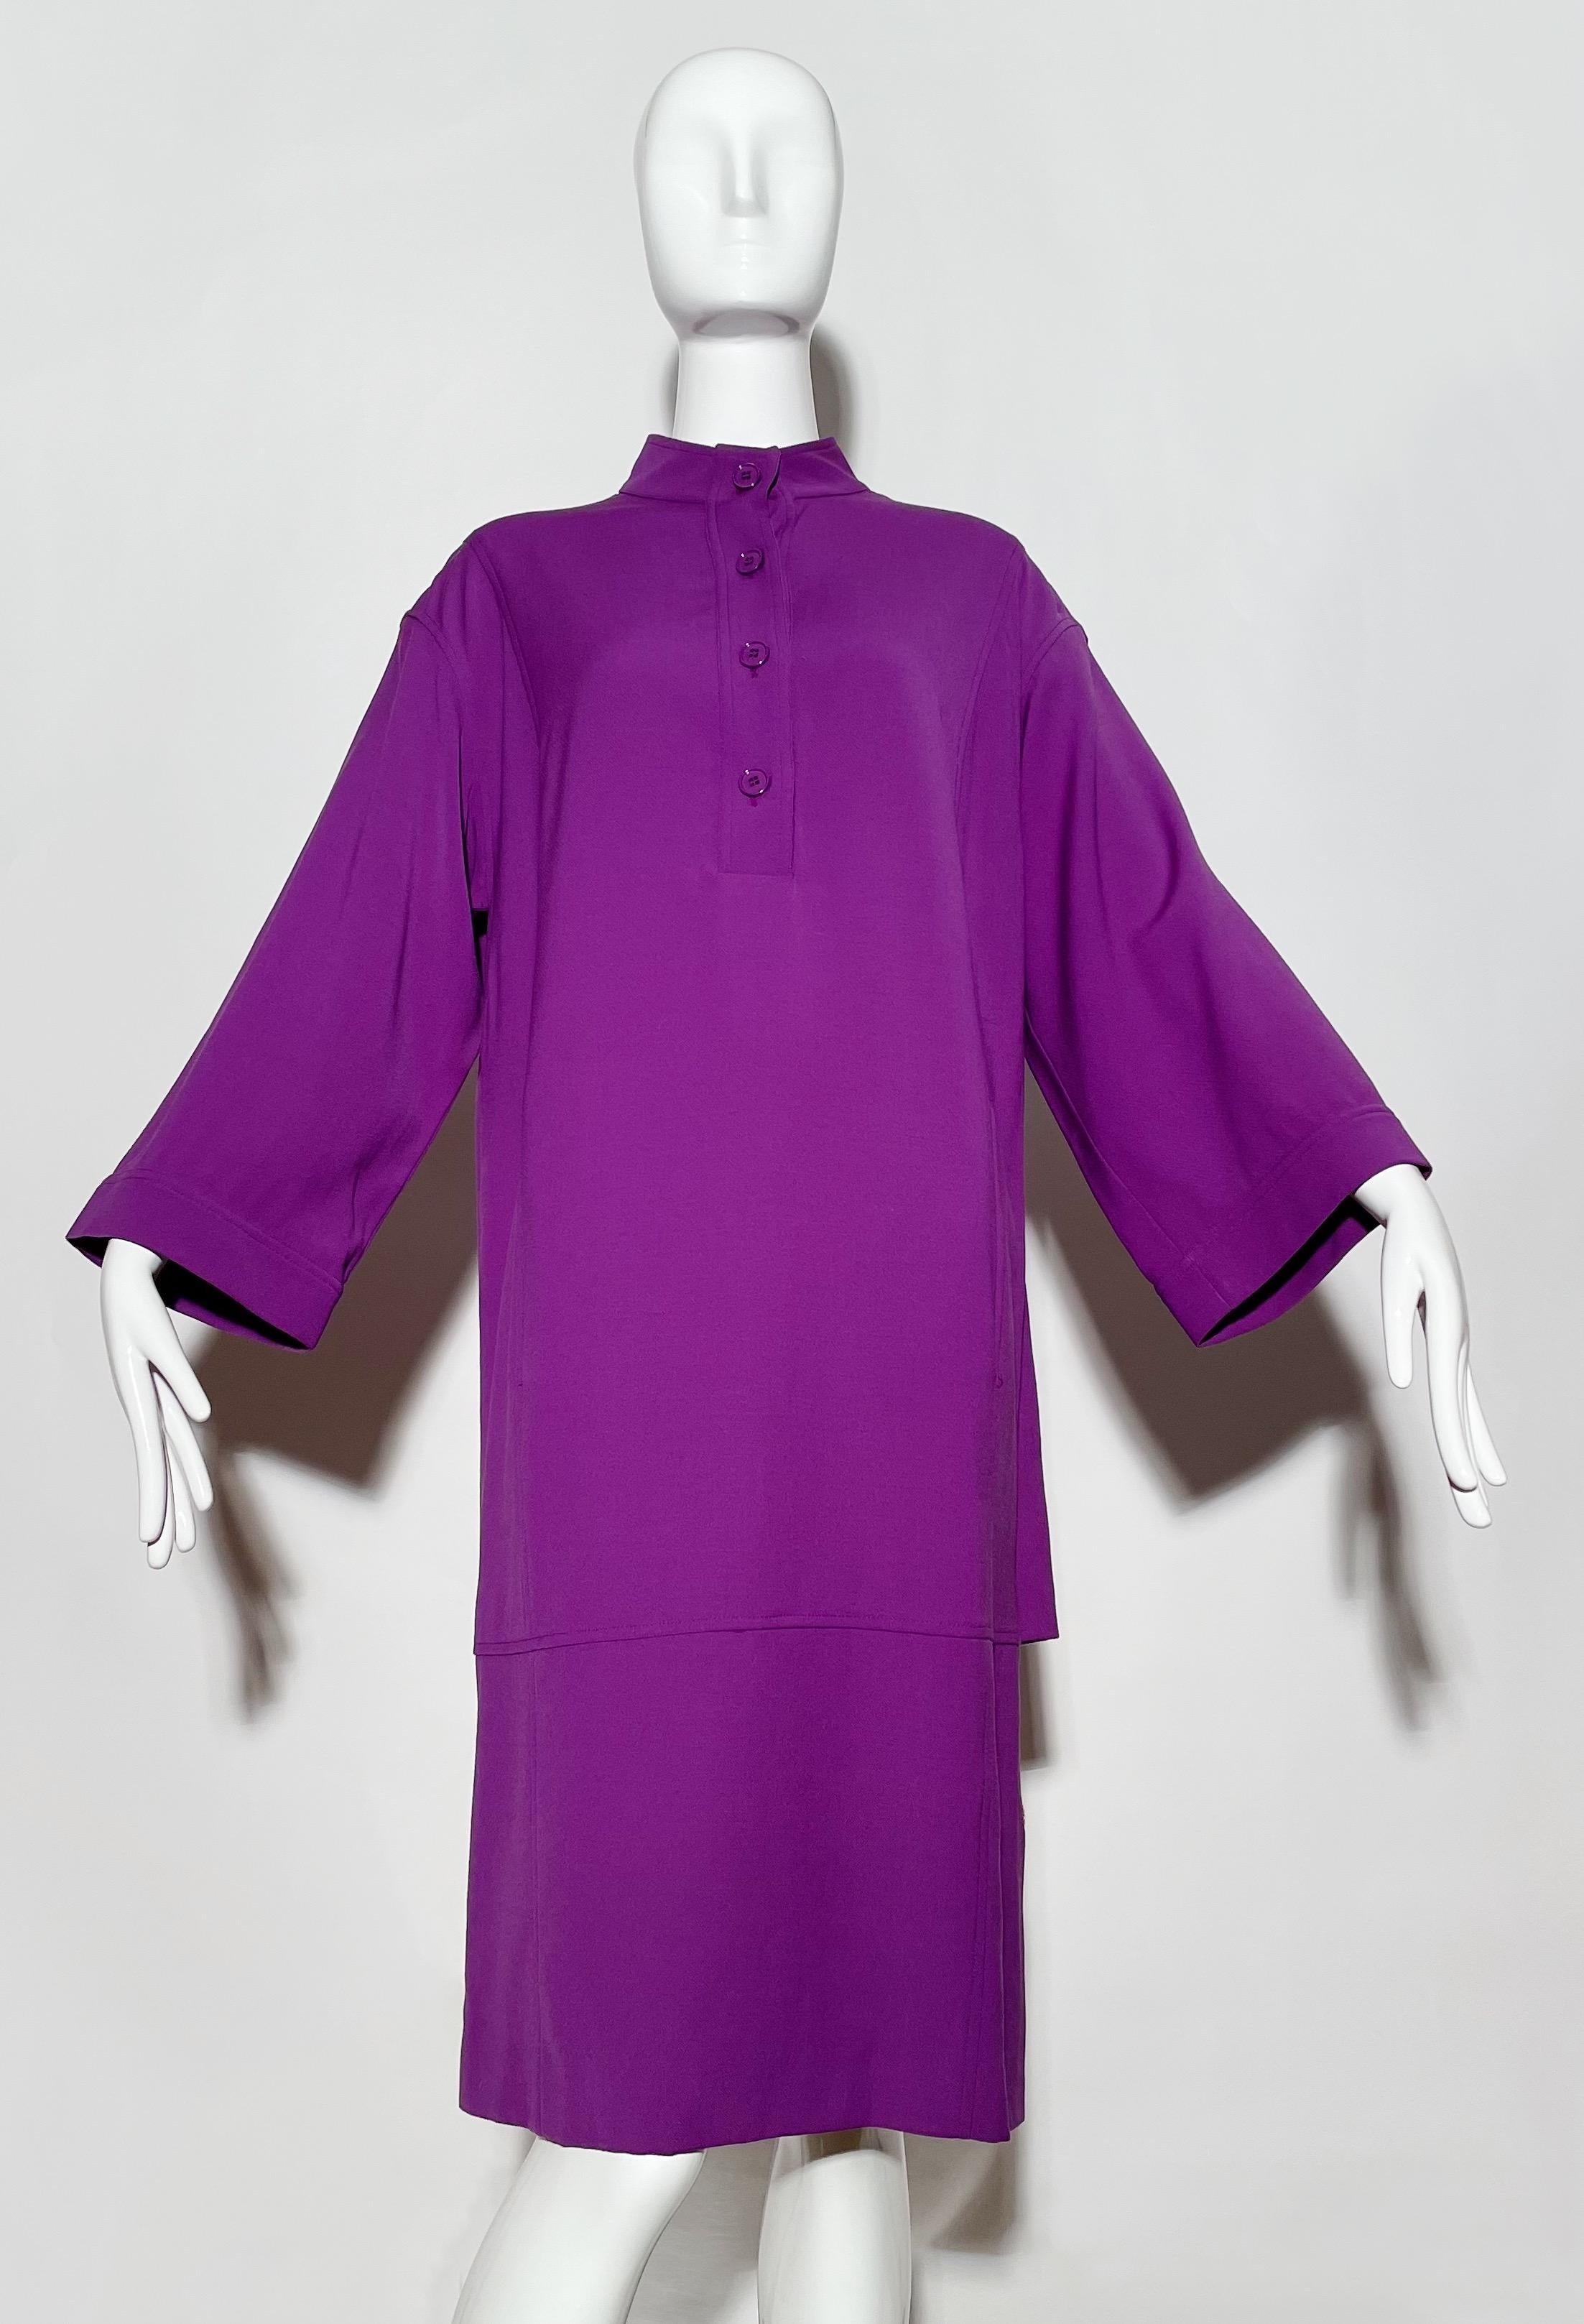 Purple Tunic dress. Double layer on back. Mandarin collar. Front buttons. Side pockets. Shoulder pads. Wool. Lined. Made in France.

*Condition: Great vintage condition. Visible Flaw ( as pictured ) 

Measurements Taken Laying Flat